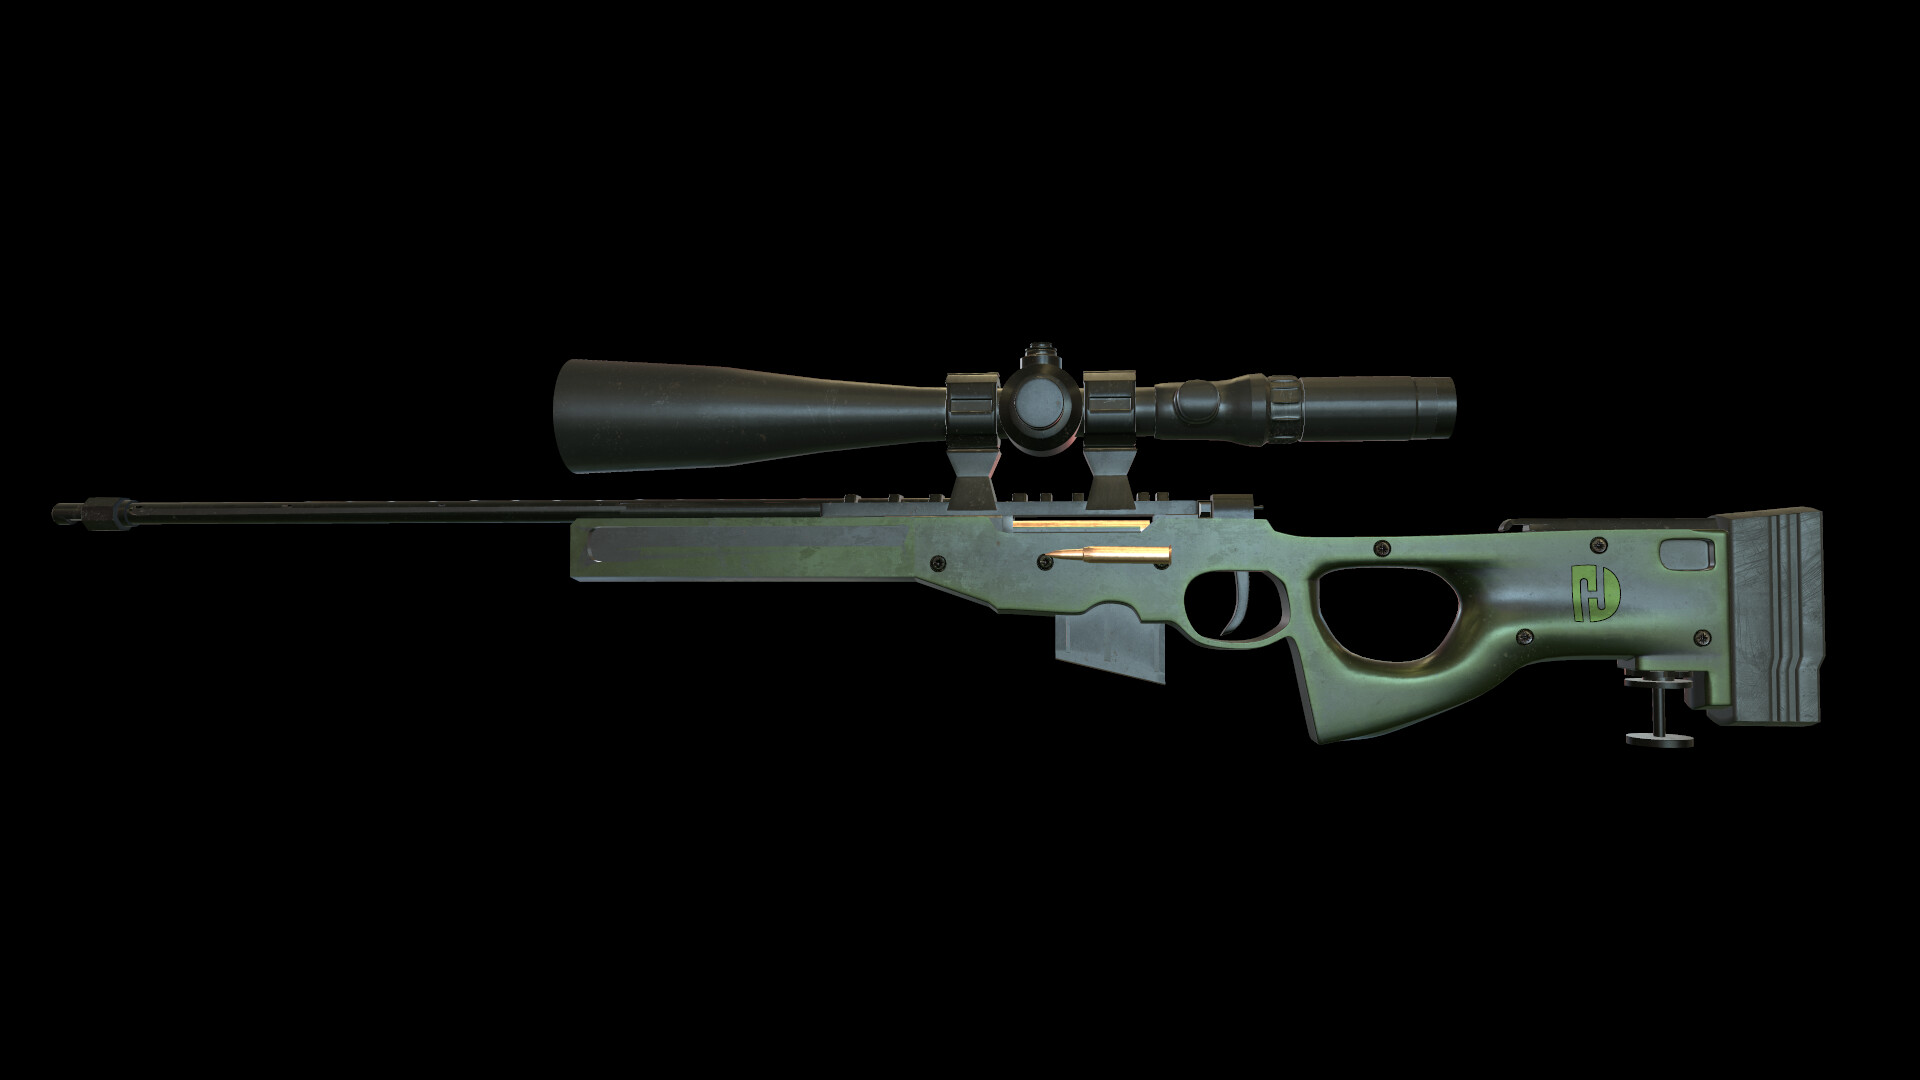 Awp cannons карта мастерская фото 57